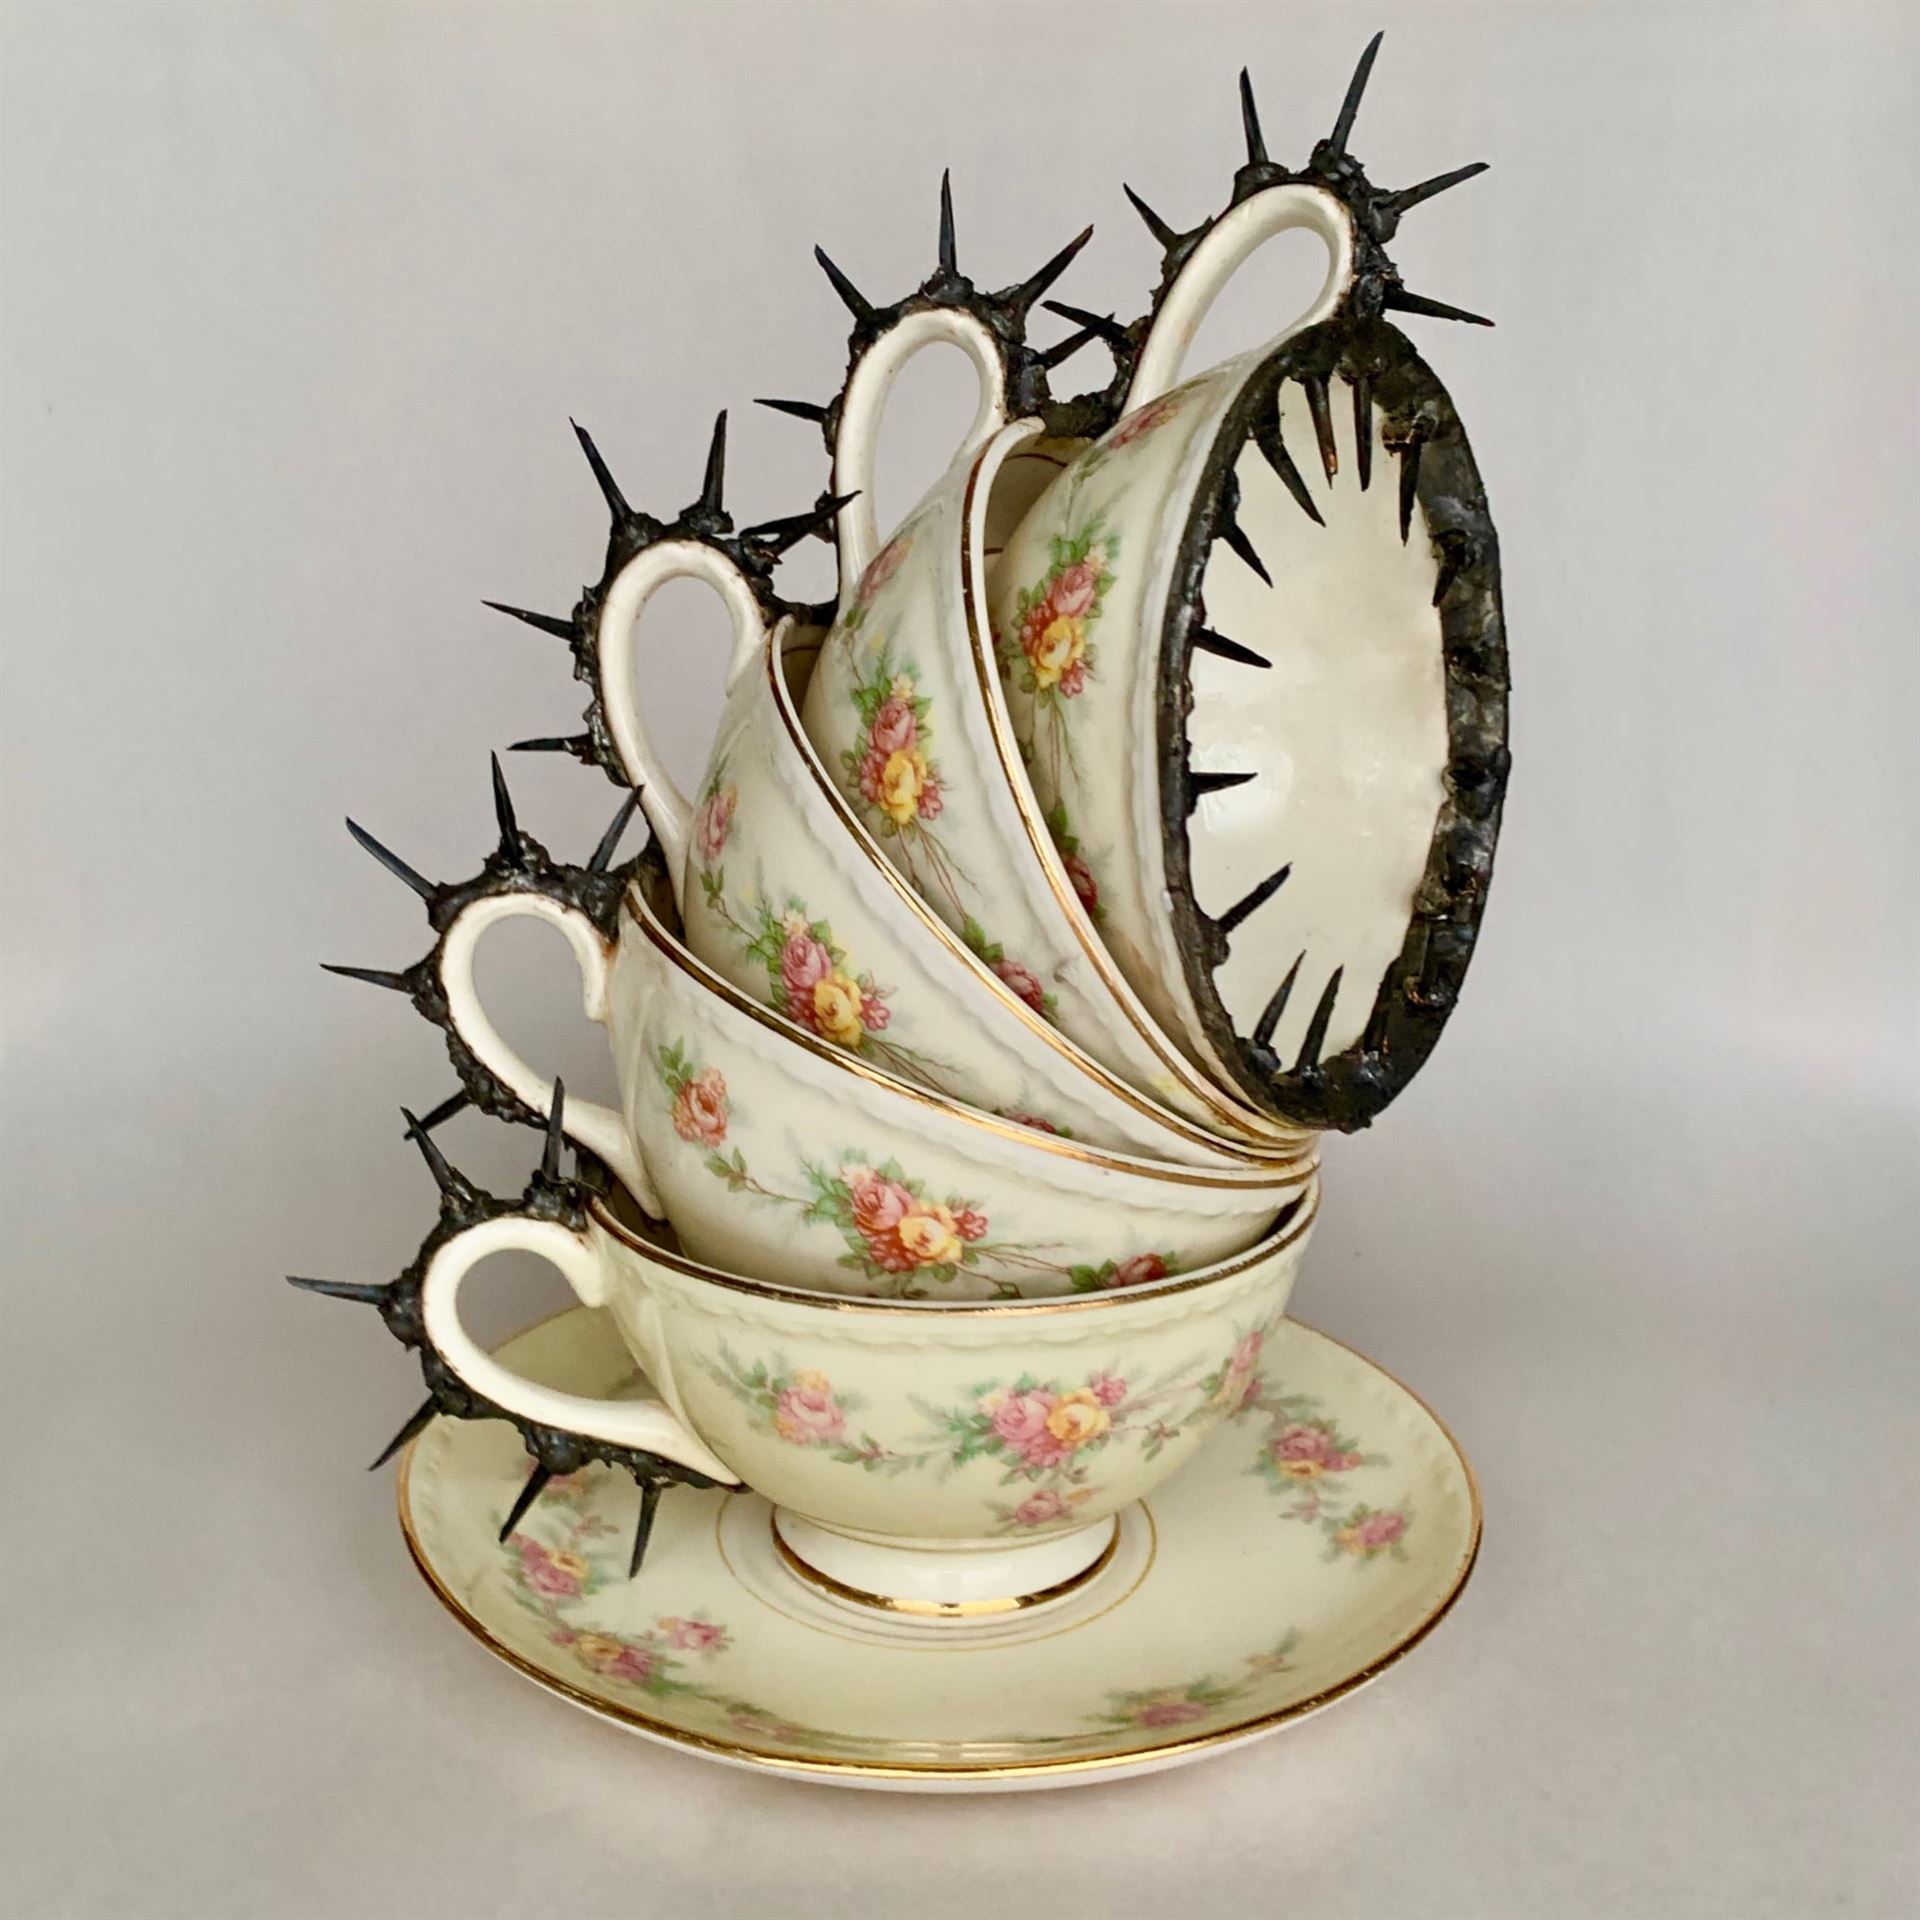 A photo of a sculpture of stacked teacups and saucer lined with barbed wire